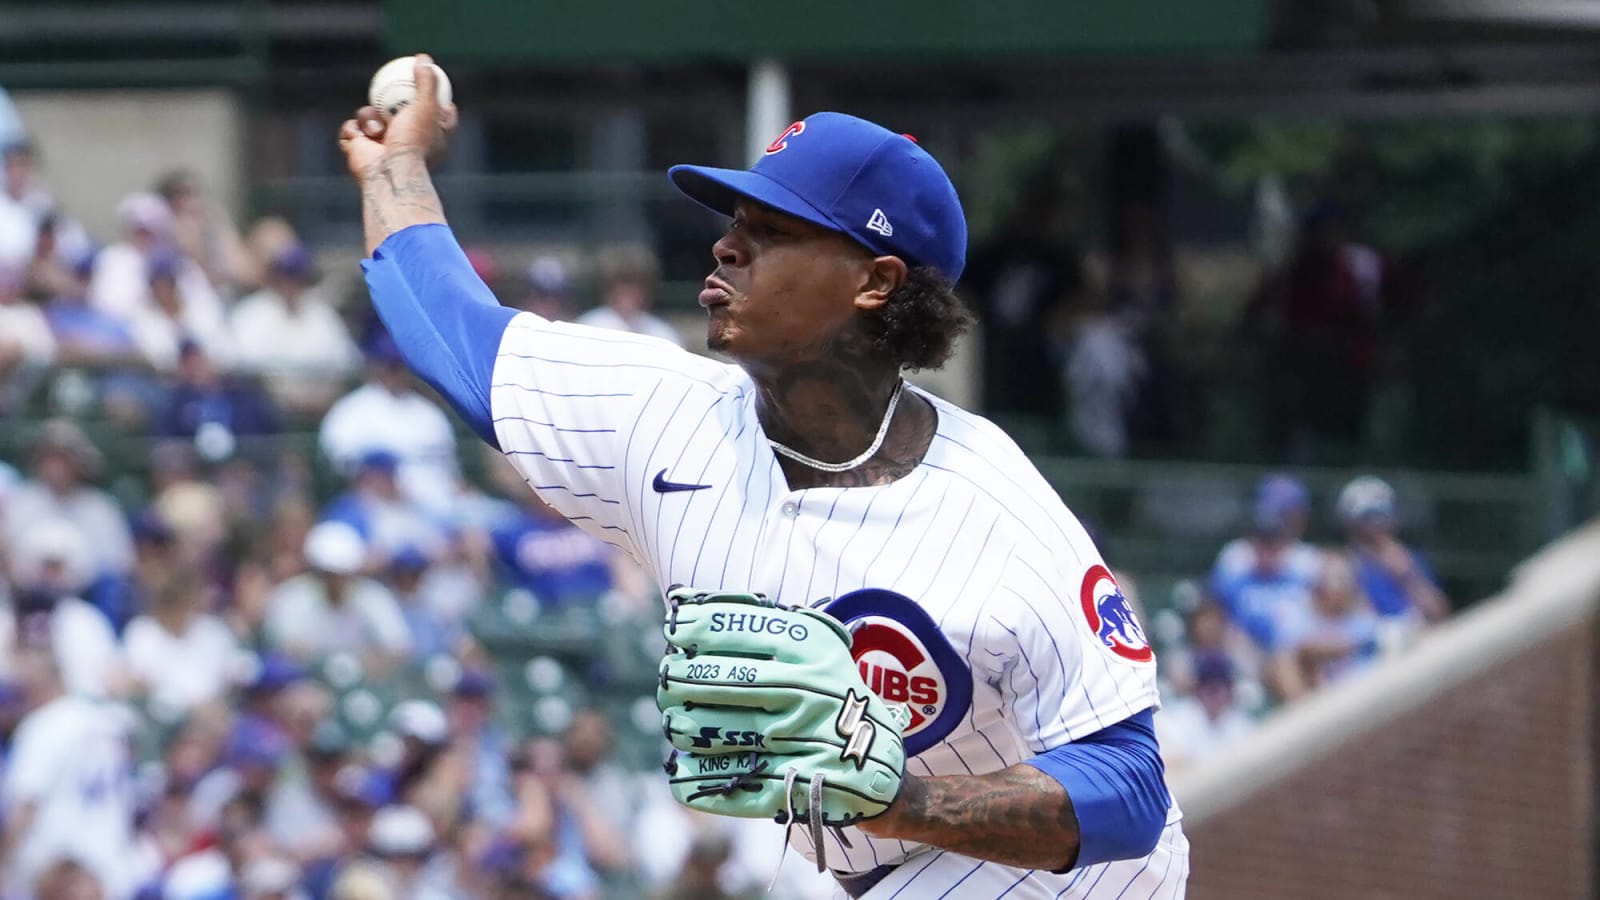 Cubs In Serious Talks With Marcus Stroman - MLB Trade Rumors